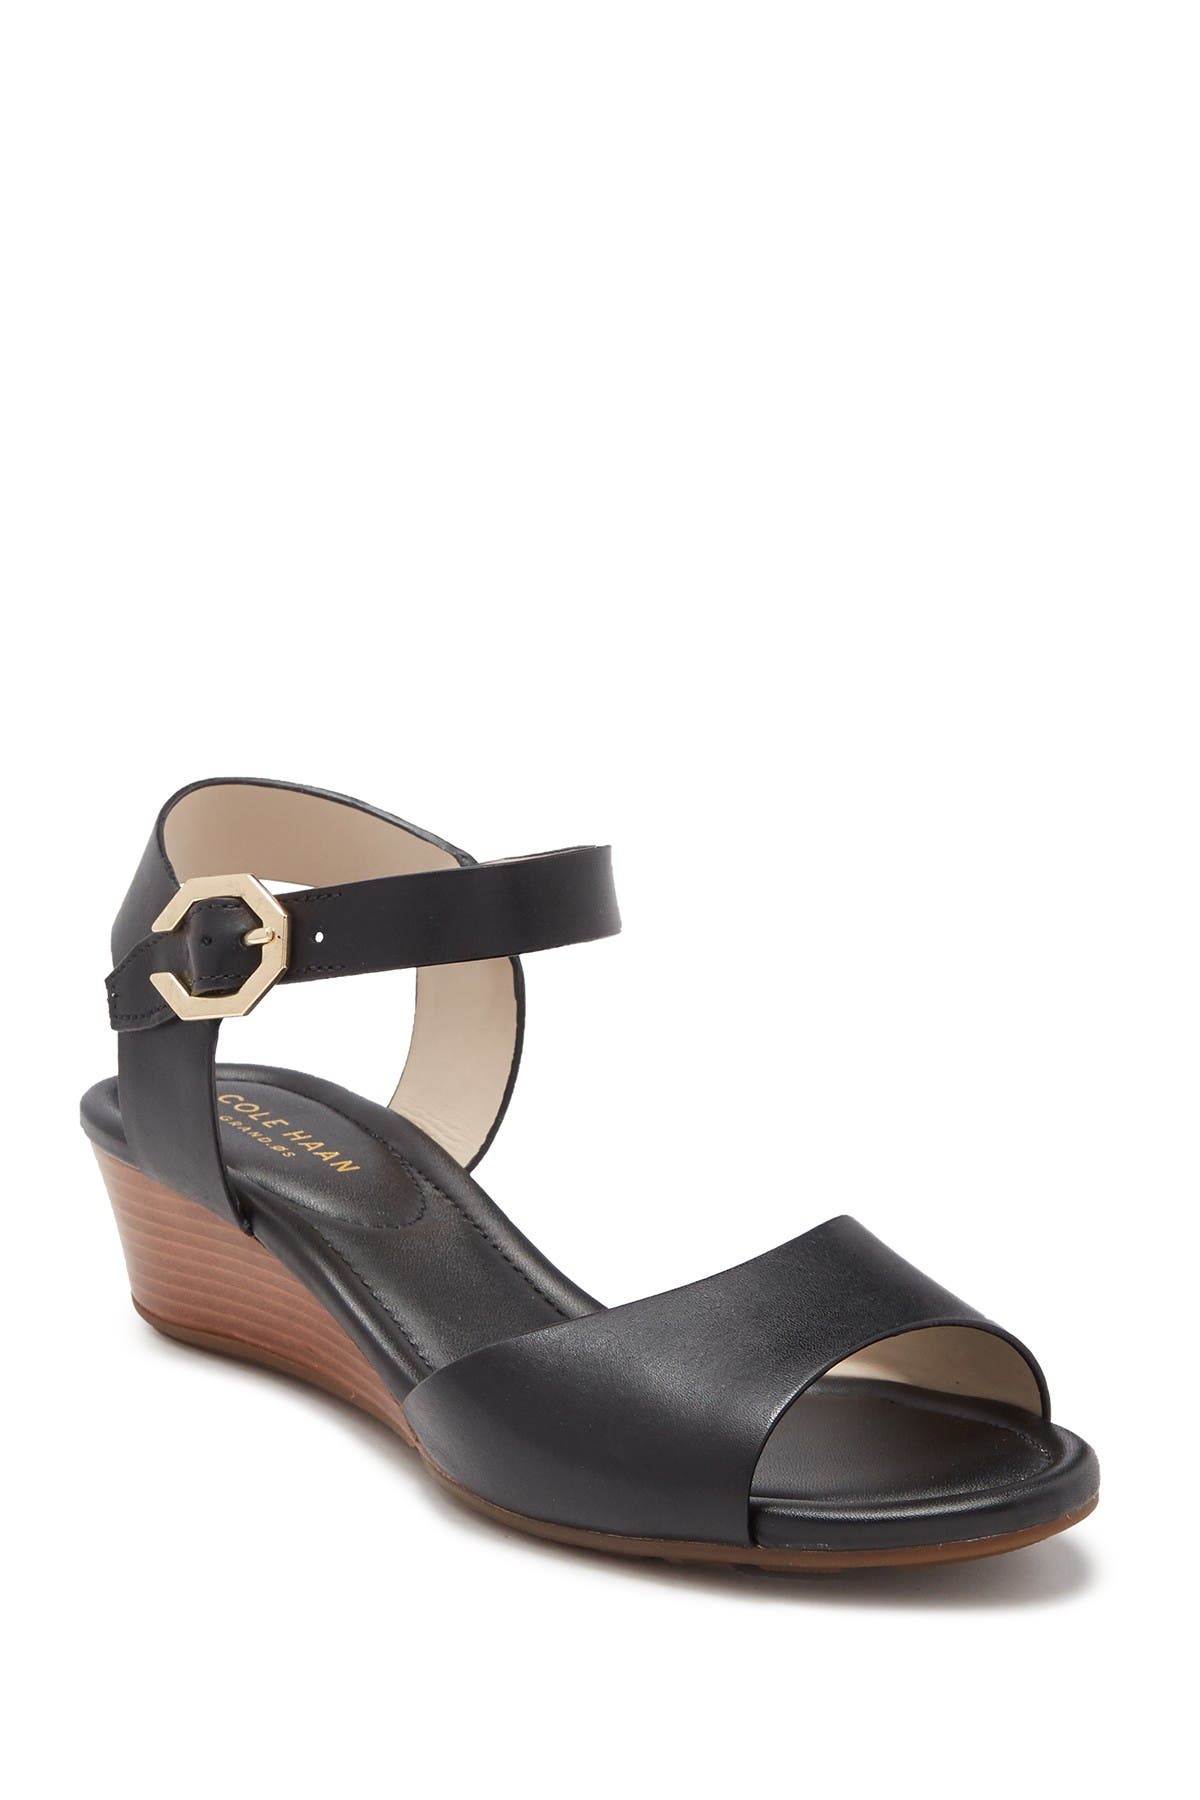 Cole Haan | Evette Strappy Wedge Sandal 